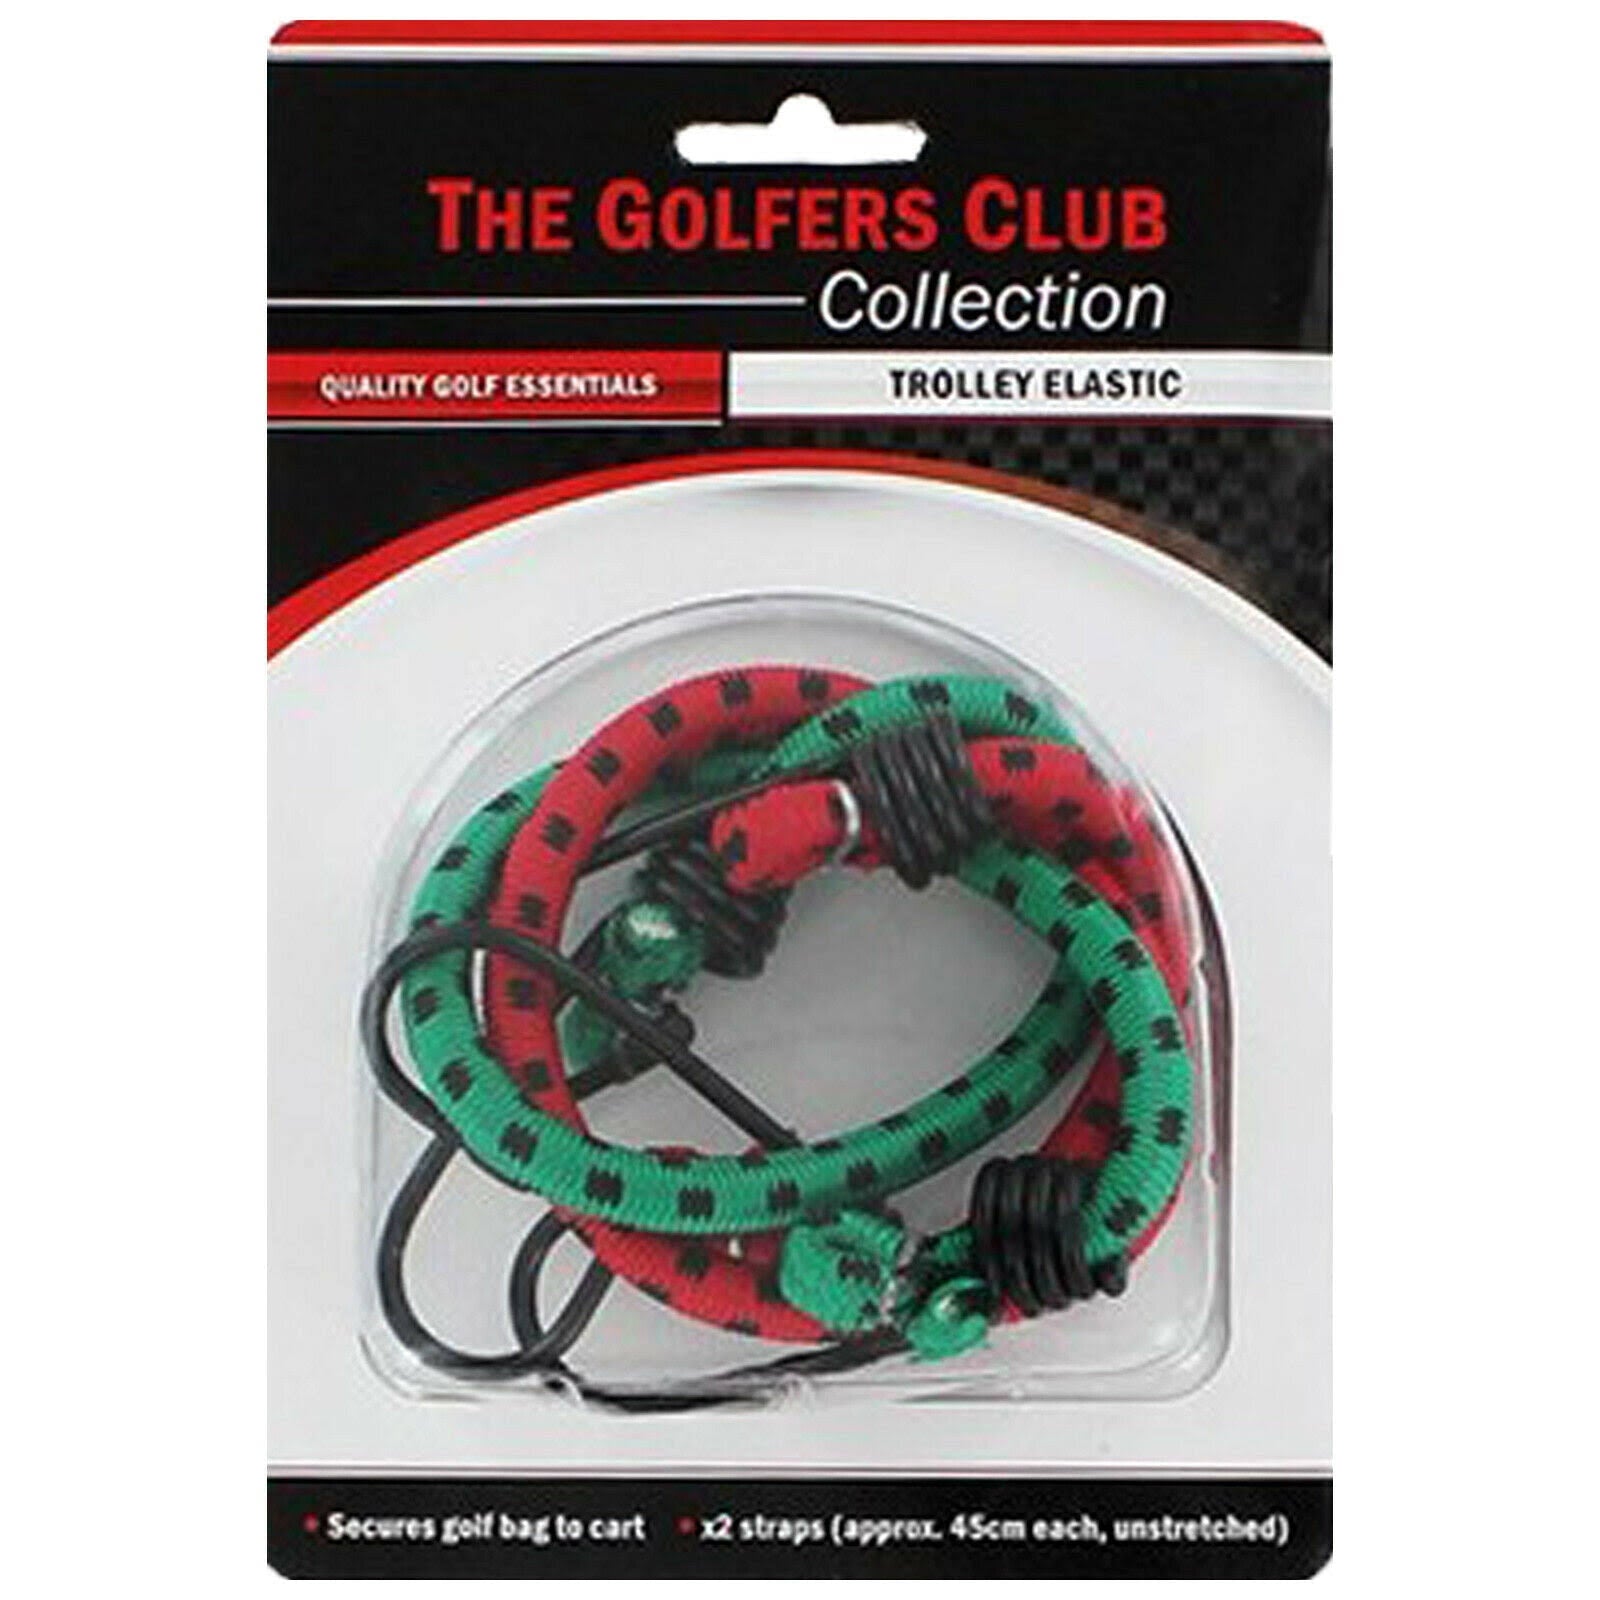 THE GOLFERS CLUB COLLECTION / TROLLEY ELASTIC